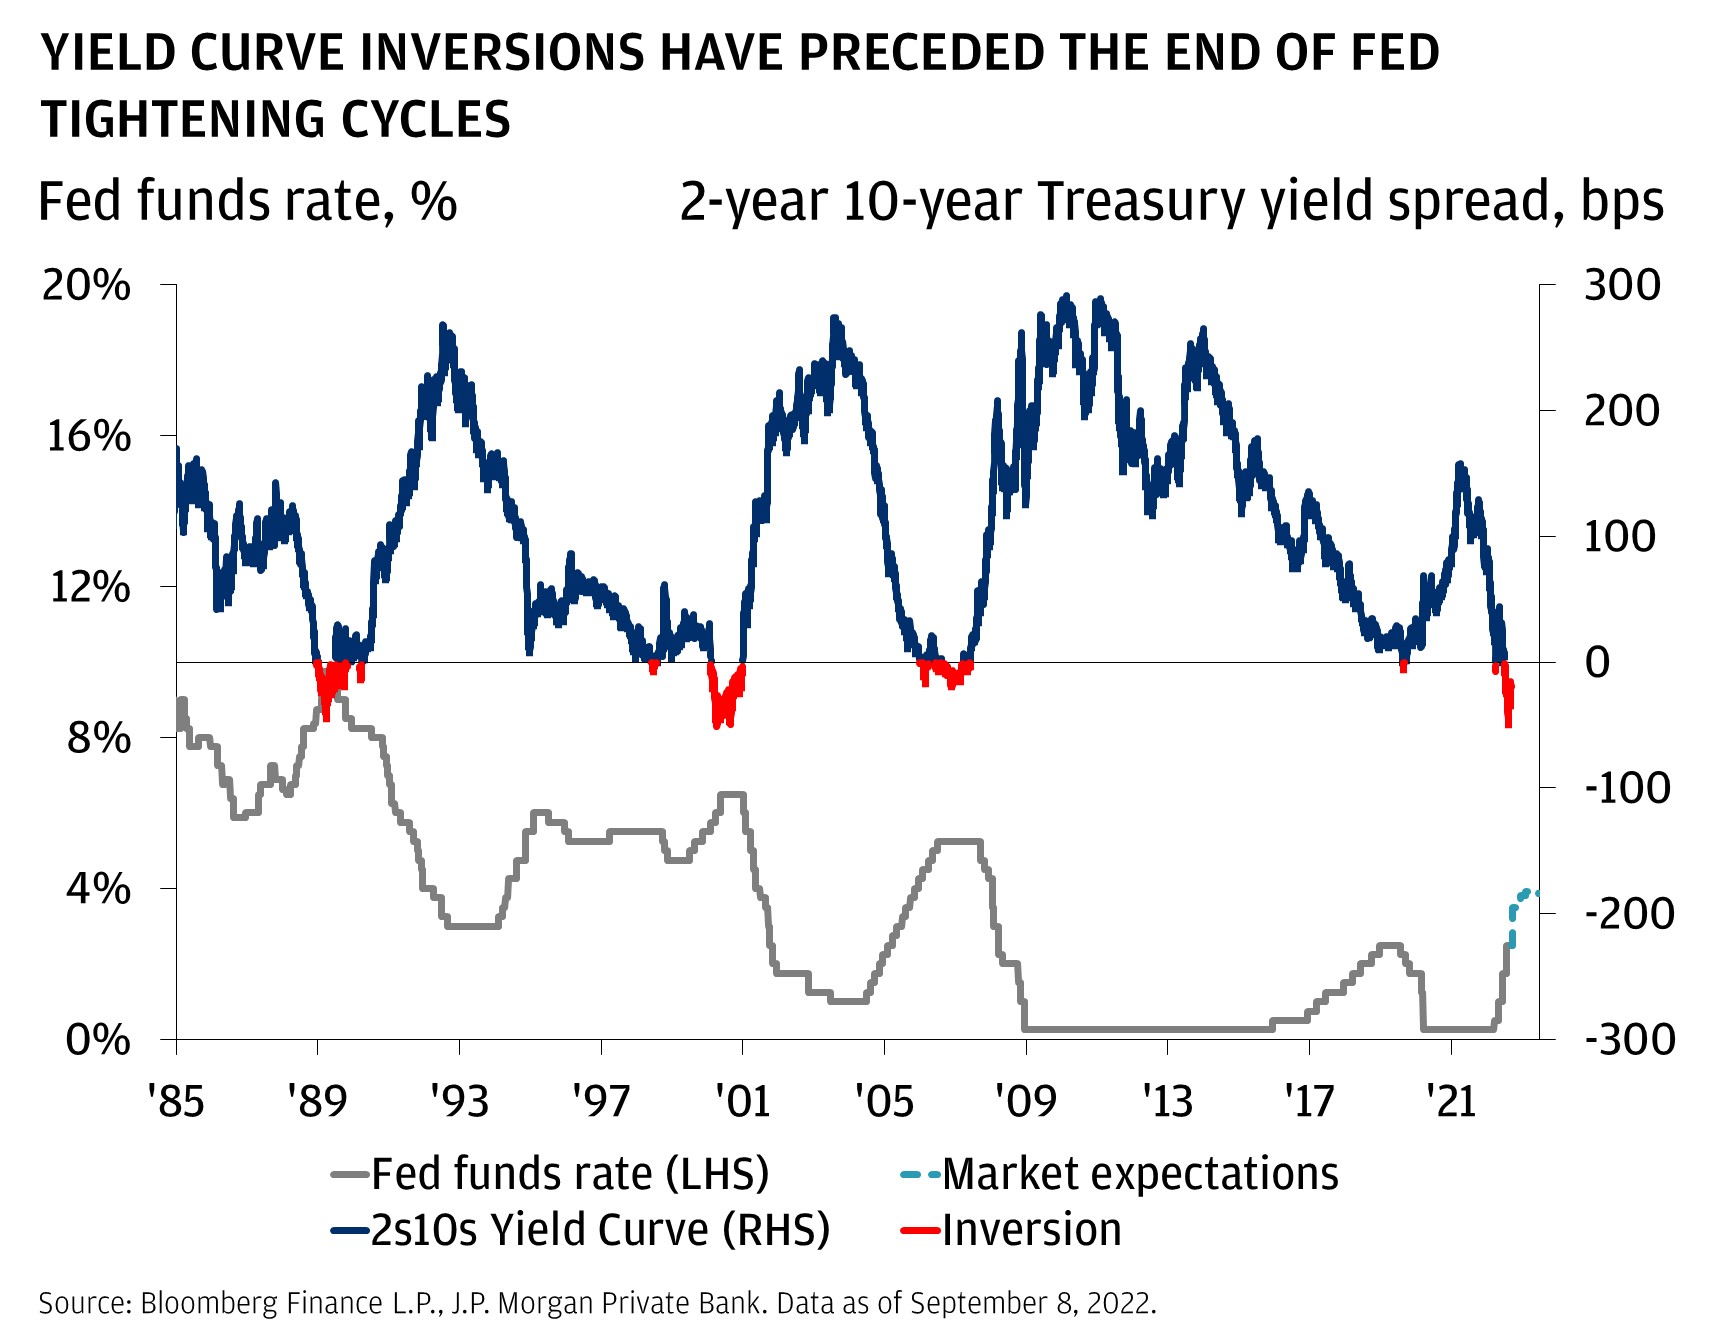 This chart shows the fed funds rate and market expectations beyond August 2022, 2s10s spread (difference between the 2-year and 10-year Treasury yield), and highlights when it inverts, from 1985 to 2022.